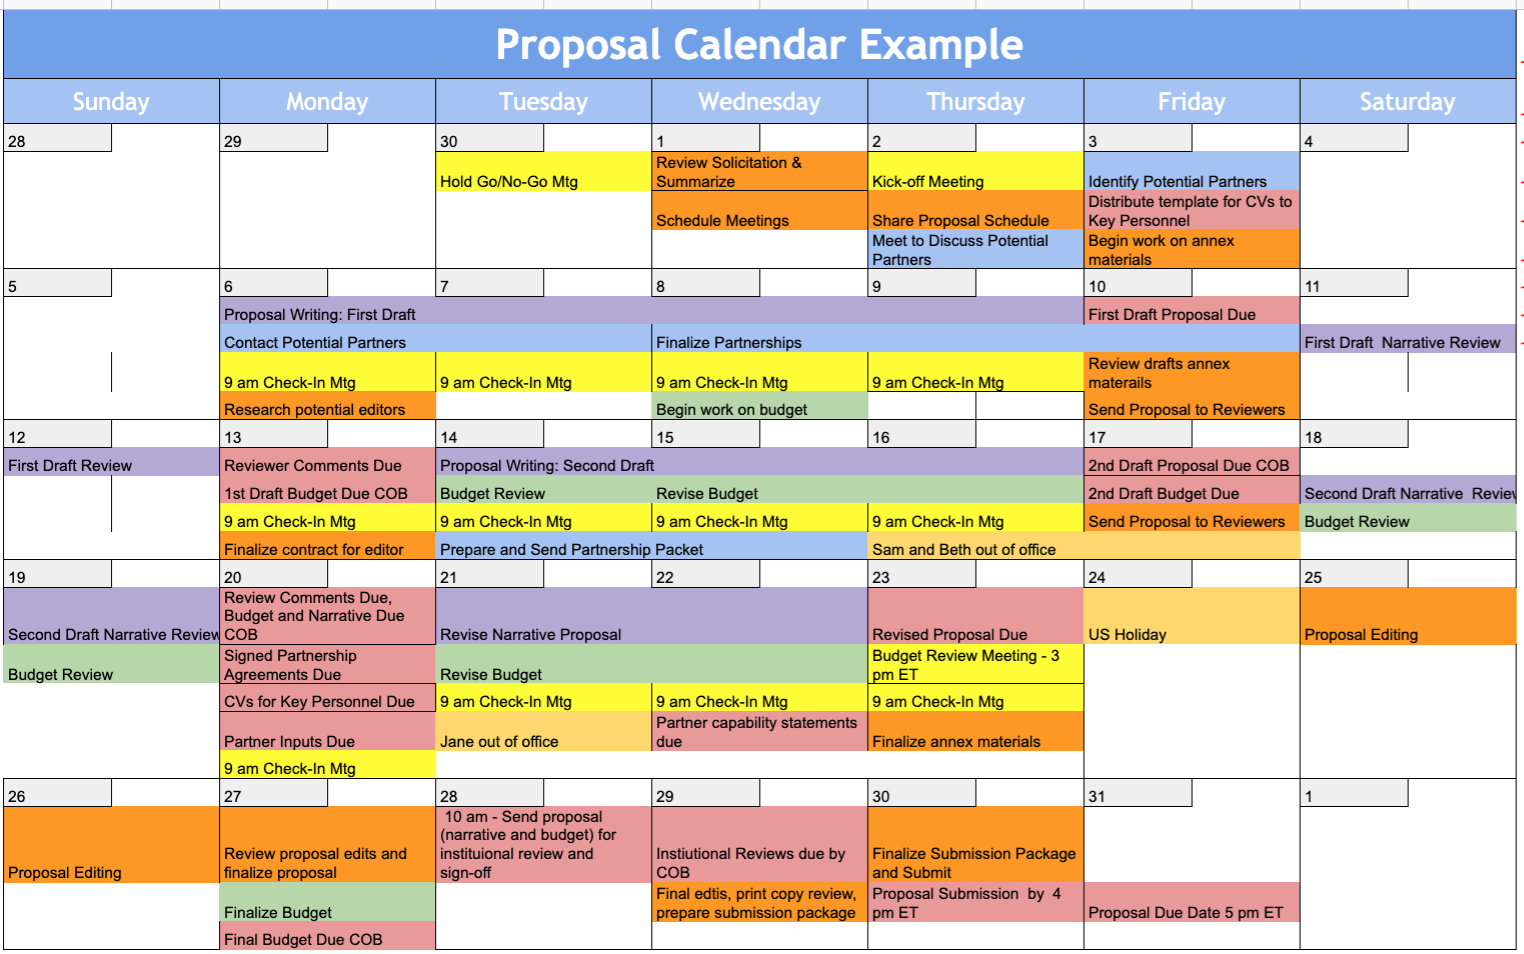 Follow This Plan and You'll Never Miss a Proposal Deadline — Peak Proposals